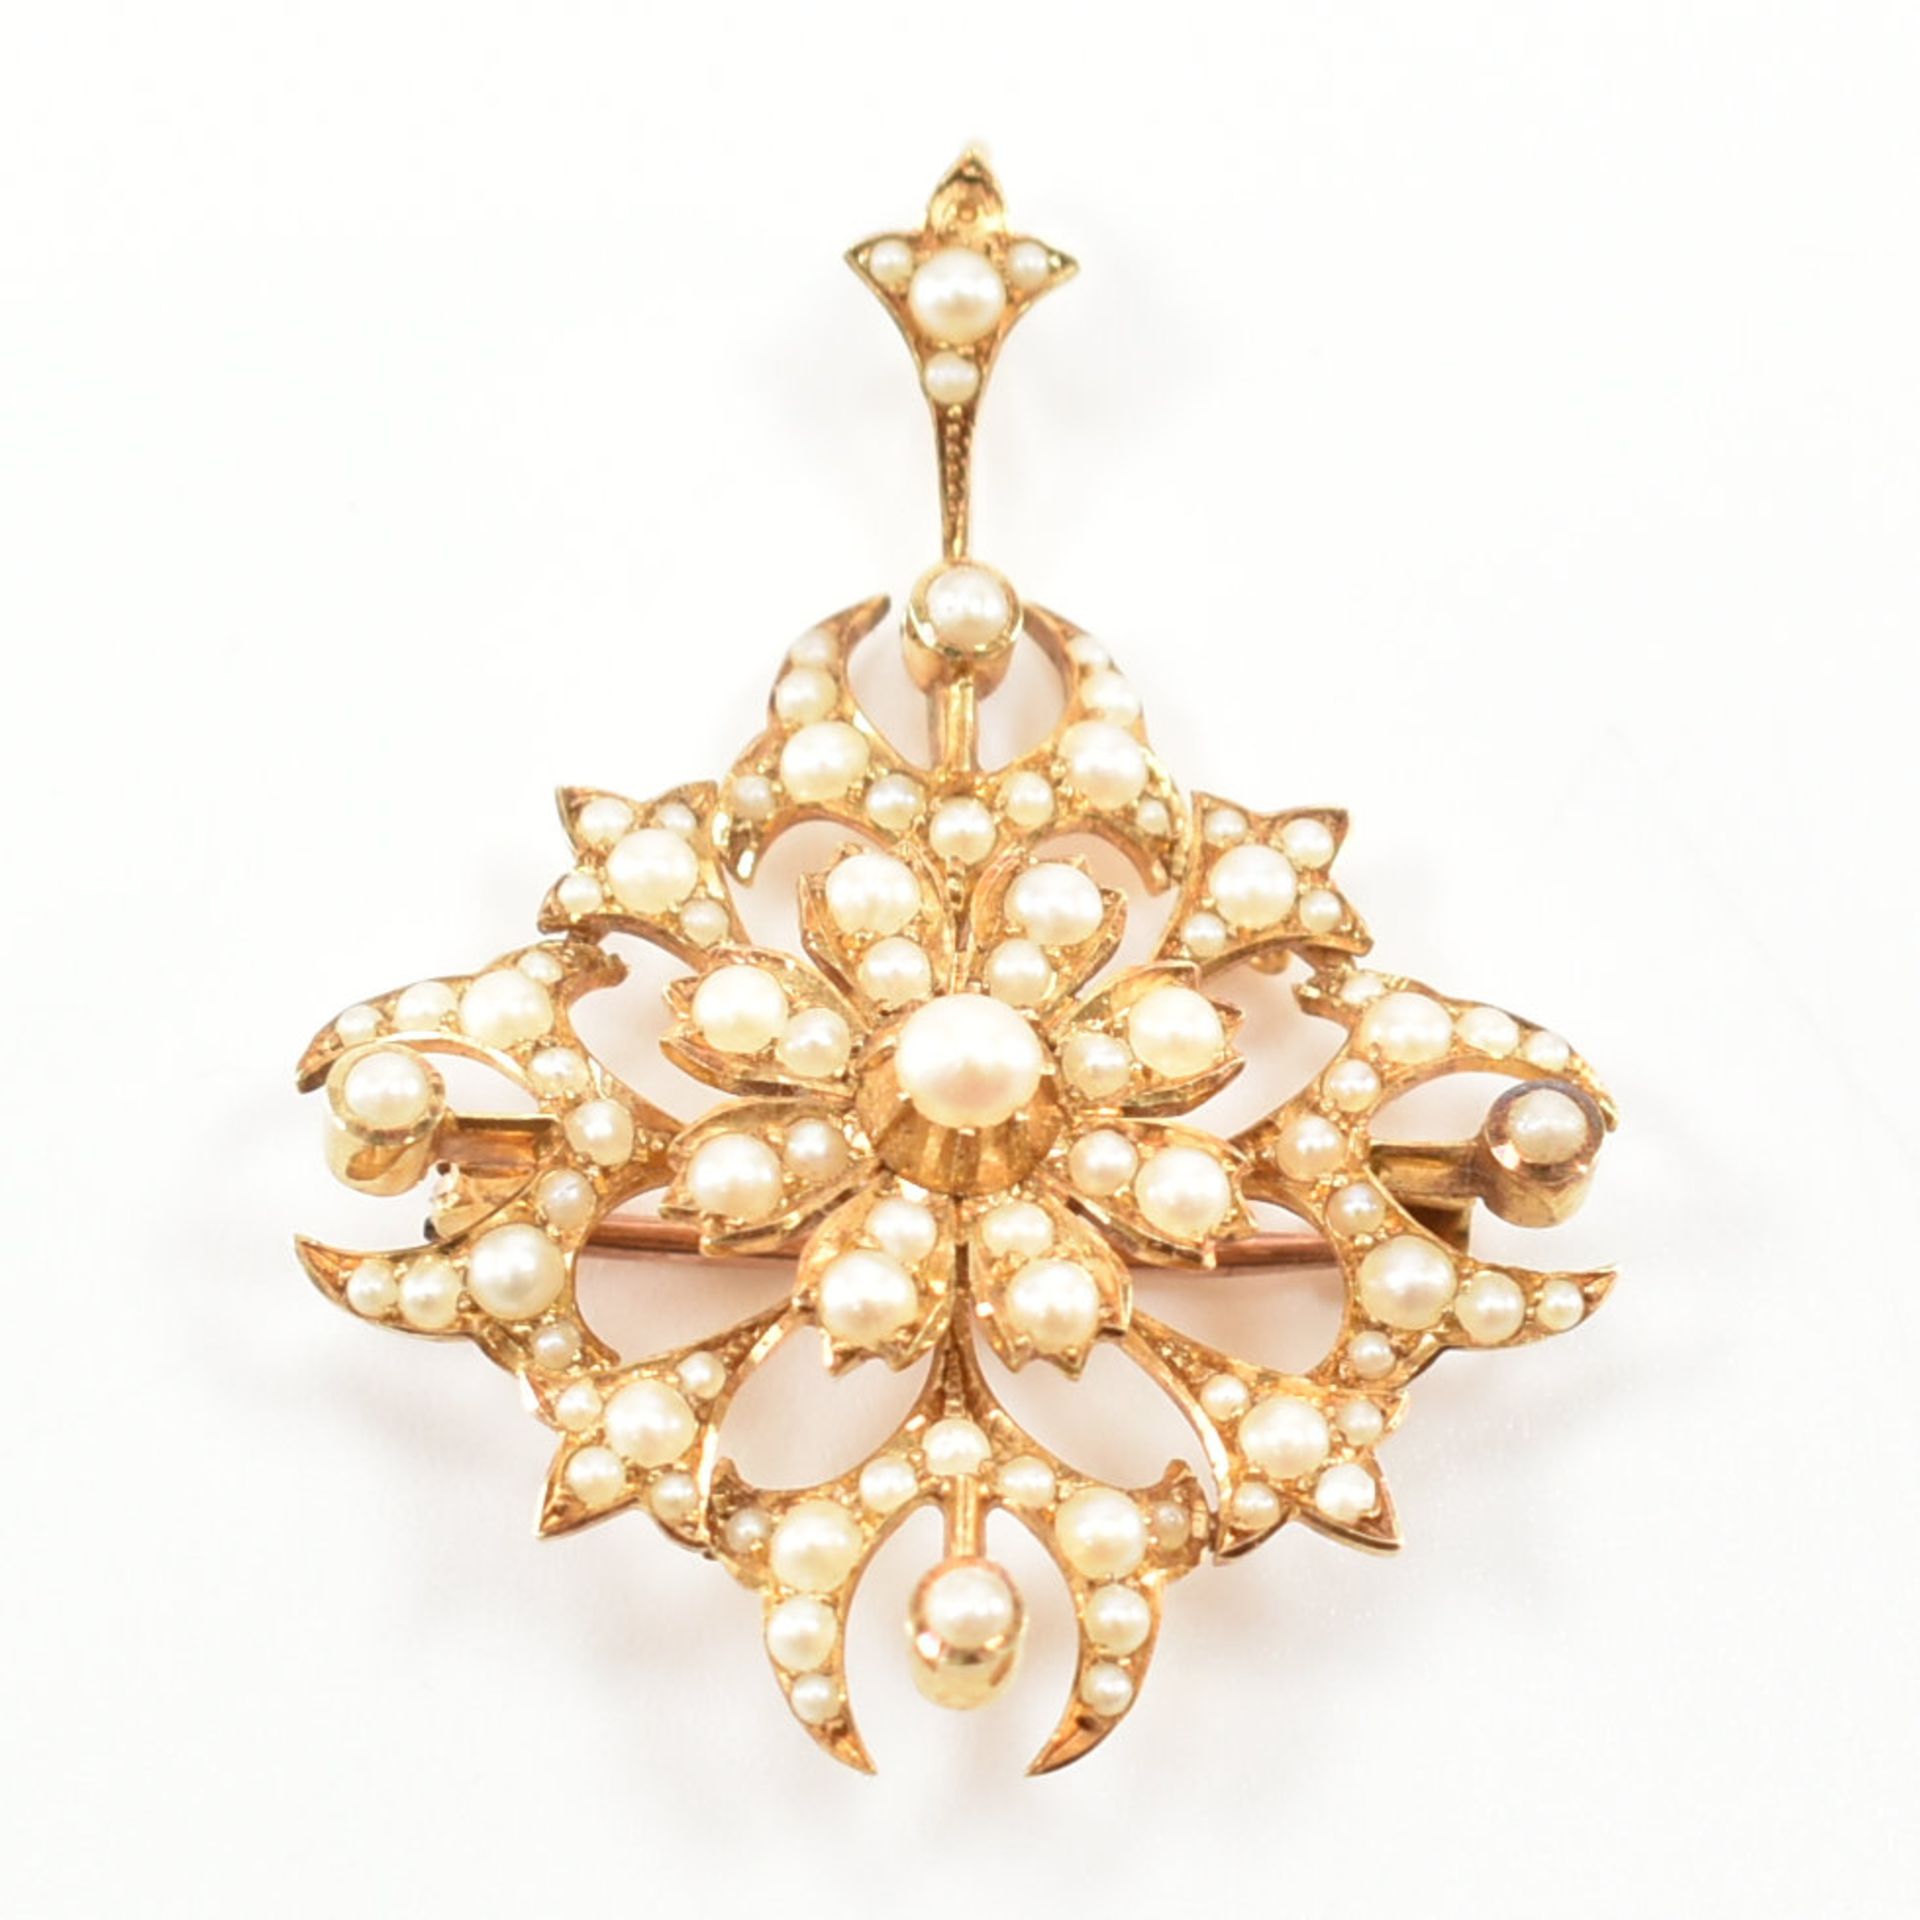 VICTORIAN 15CT GOLD & SEED PEARL PENDANT BROOCH - Image 2 of 6